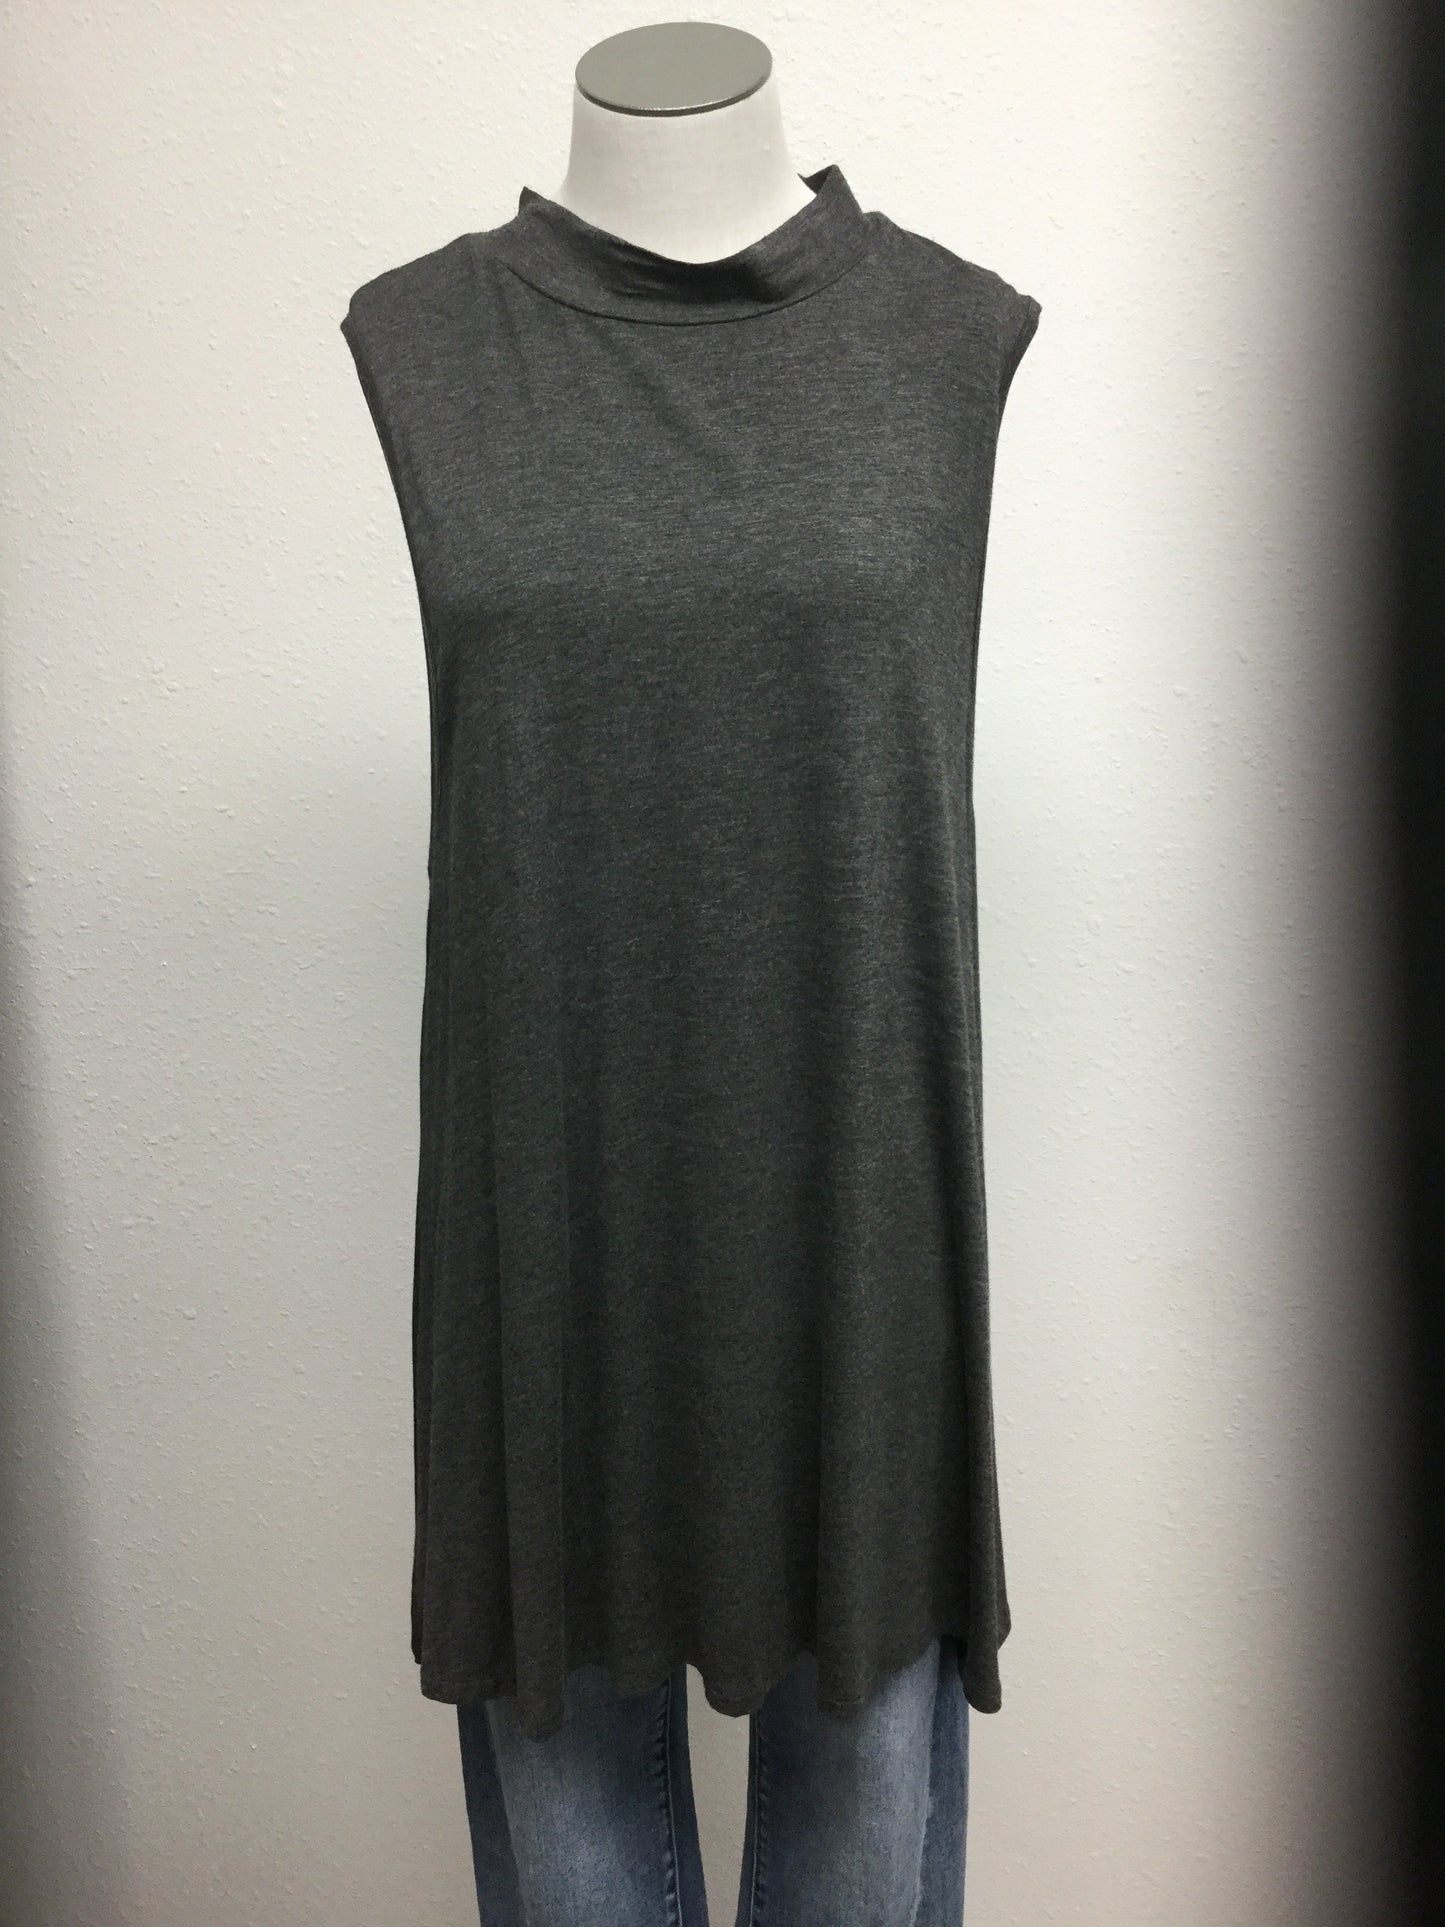 RS-189X-T Charcoal Knit Solid Sleeveless Mock Neck Top